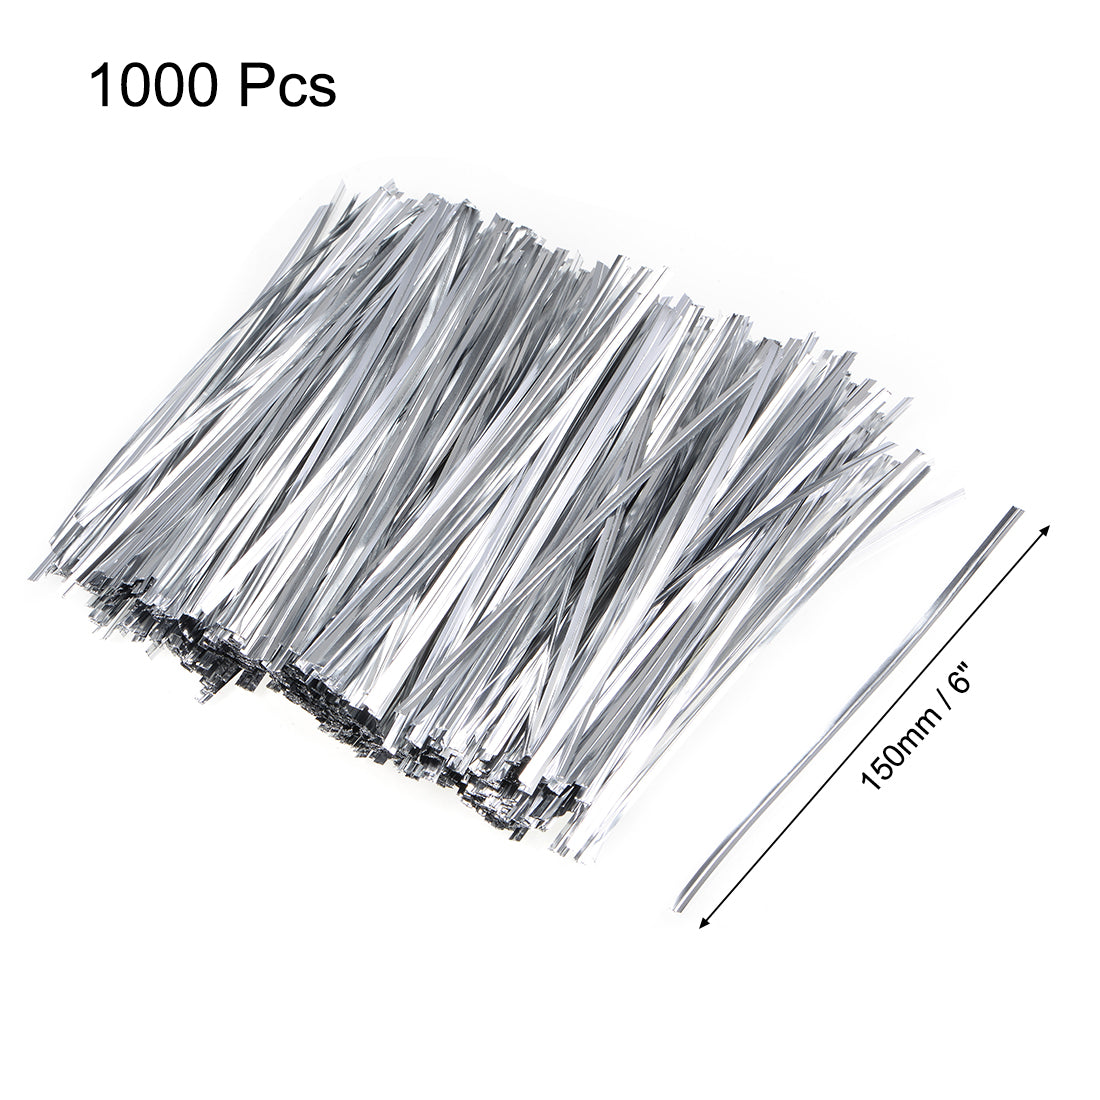 uxcell Uxcell Long Strong Twist Ties 5.9 Inches Quality Plastic Closure Tie for Tying Gift Bags Art Craft Ties Manage Cords Silvery 1000pcs